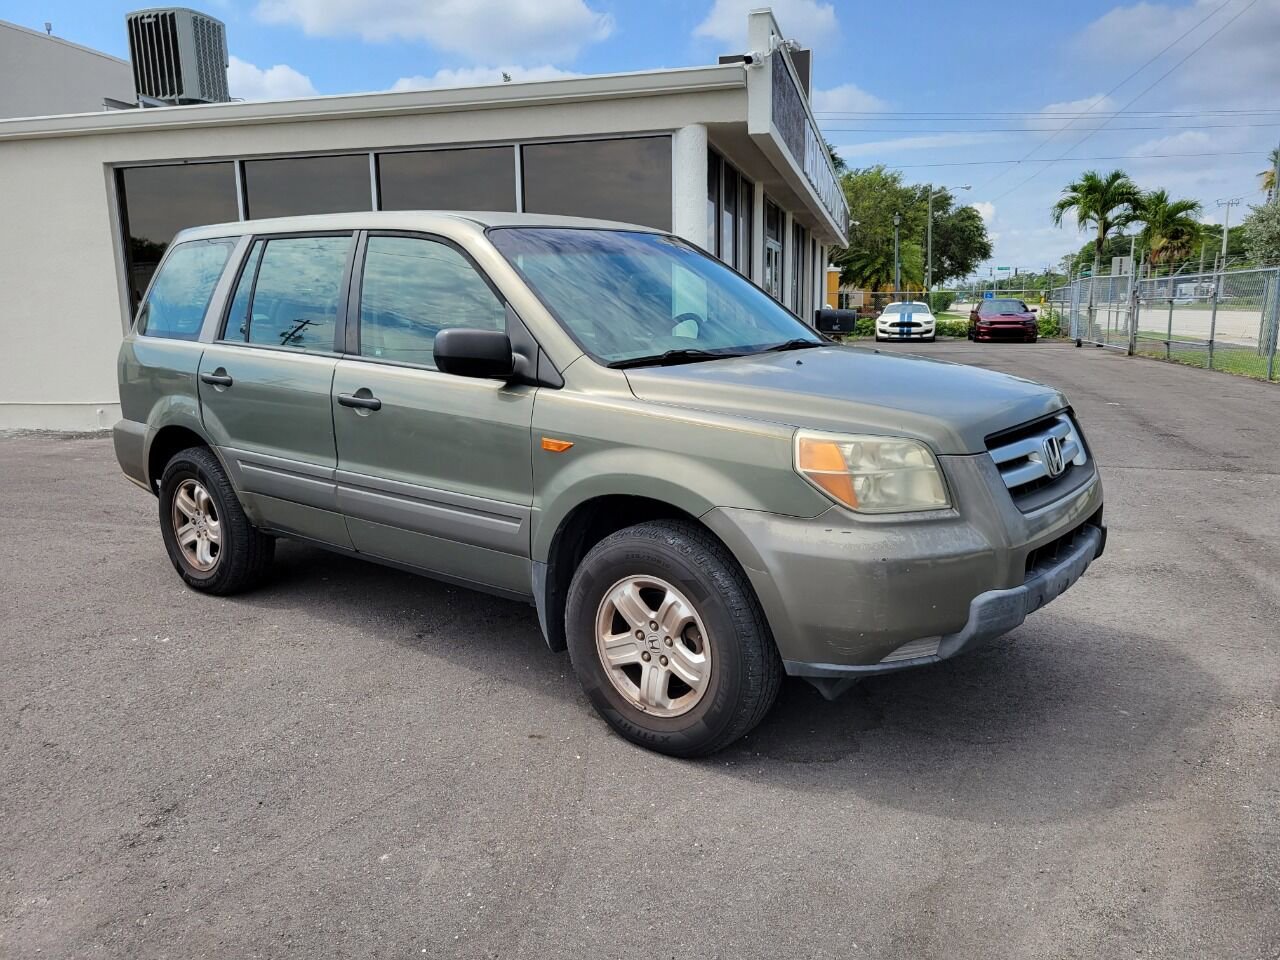 Used 2007 Honda Pilot for Sale in Hollywood, FL (Test Drive at Home) -  Kelley Blue Book